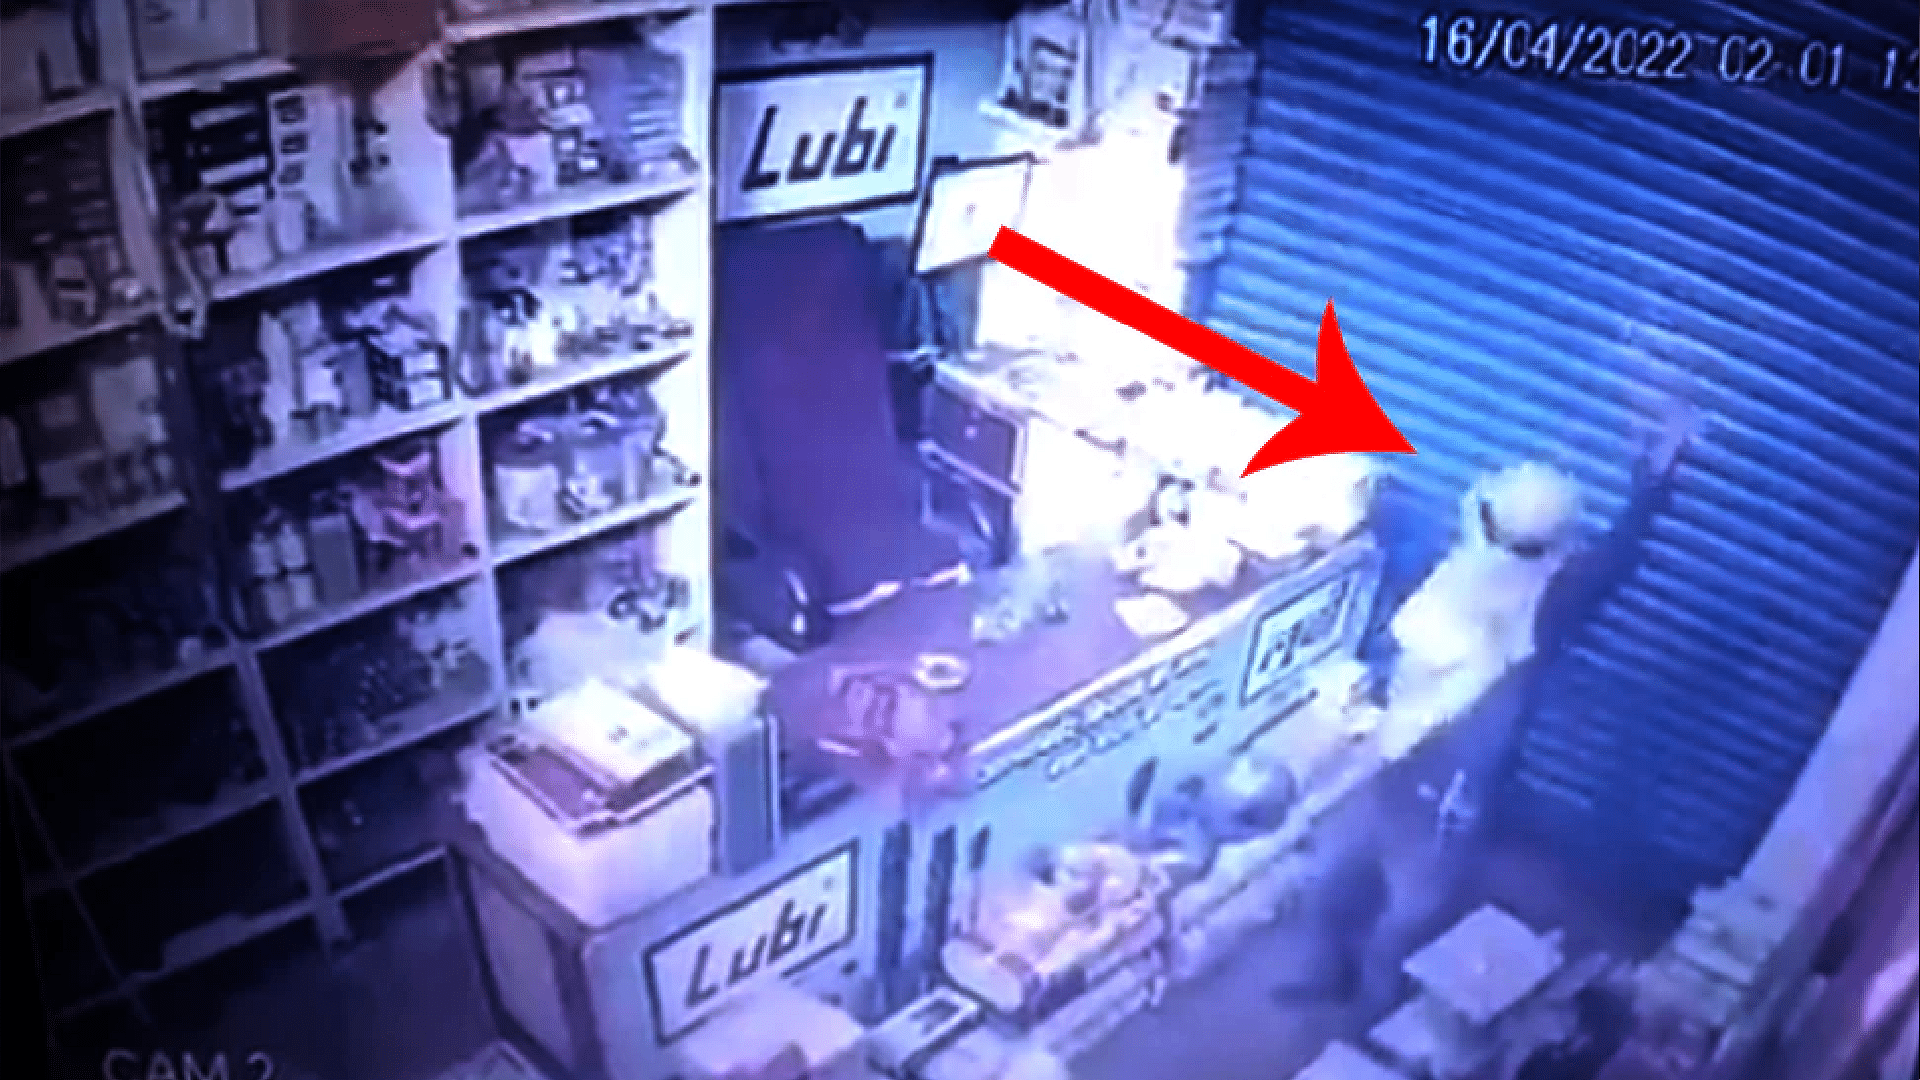 The thief danced after stealing the shop in up chandauli everything was captured in CCTV footage